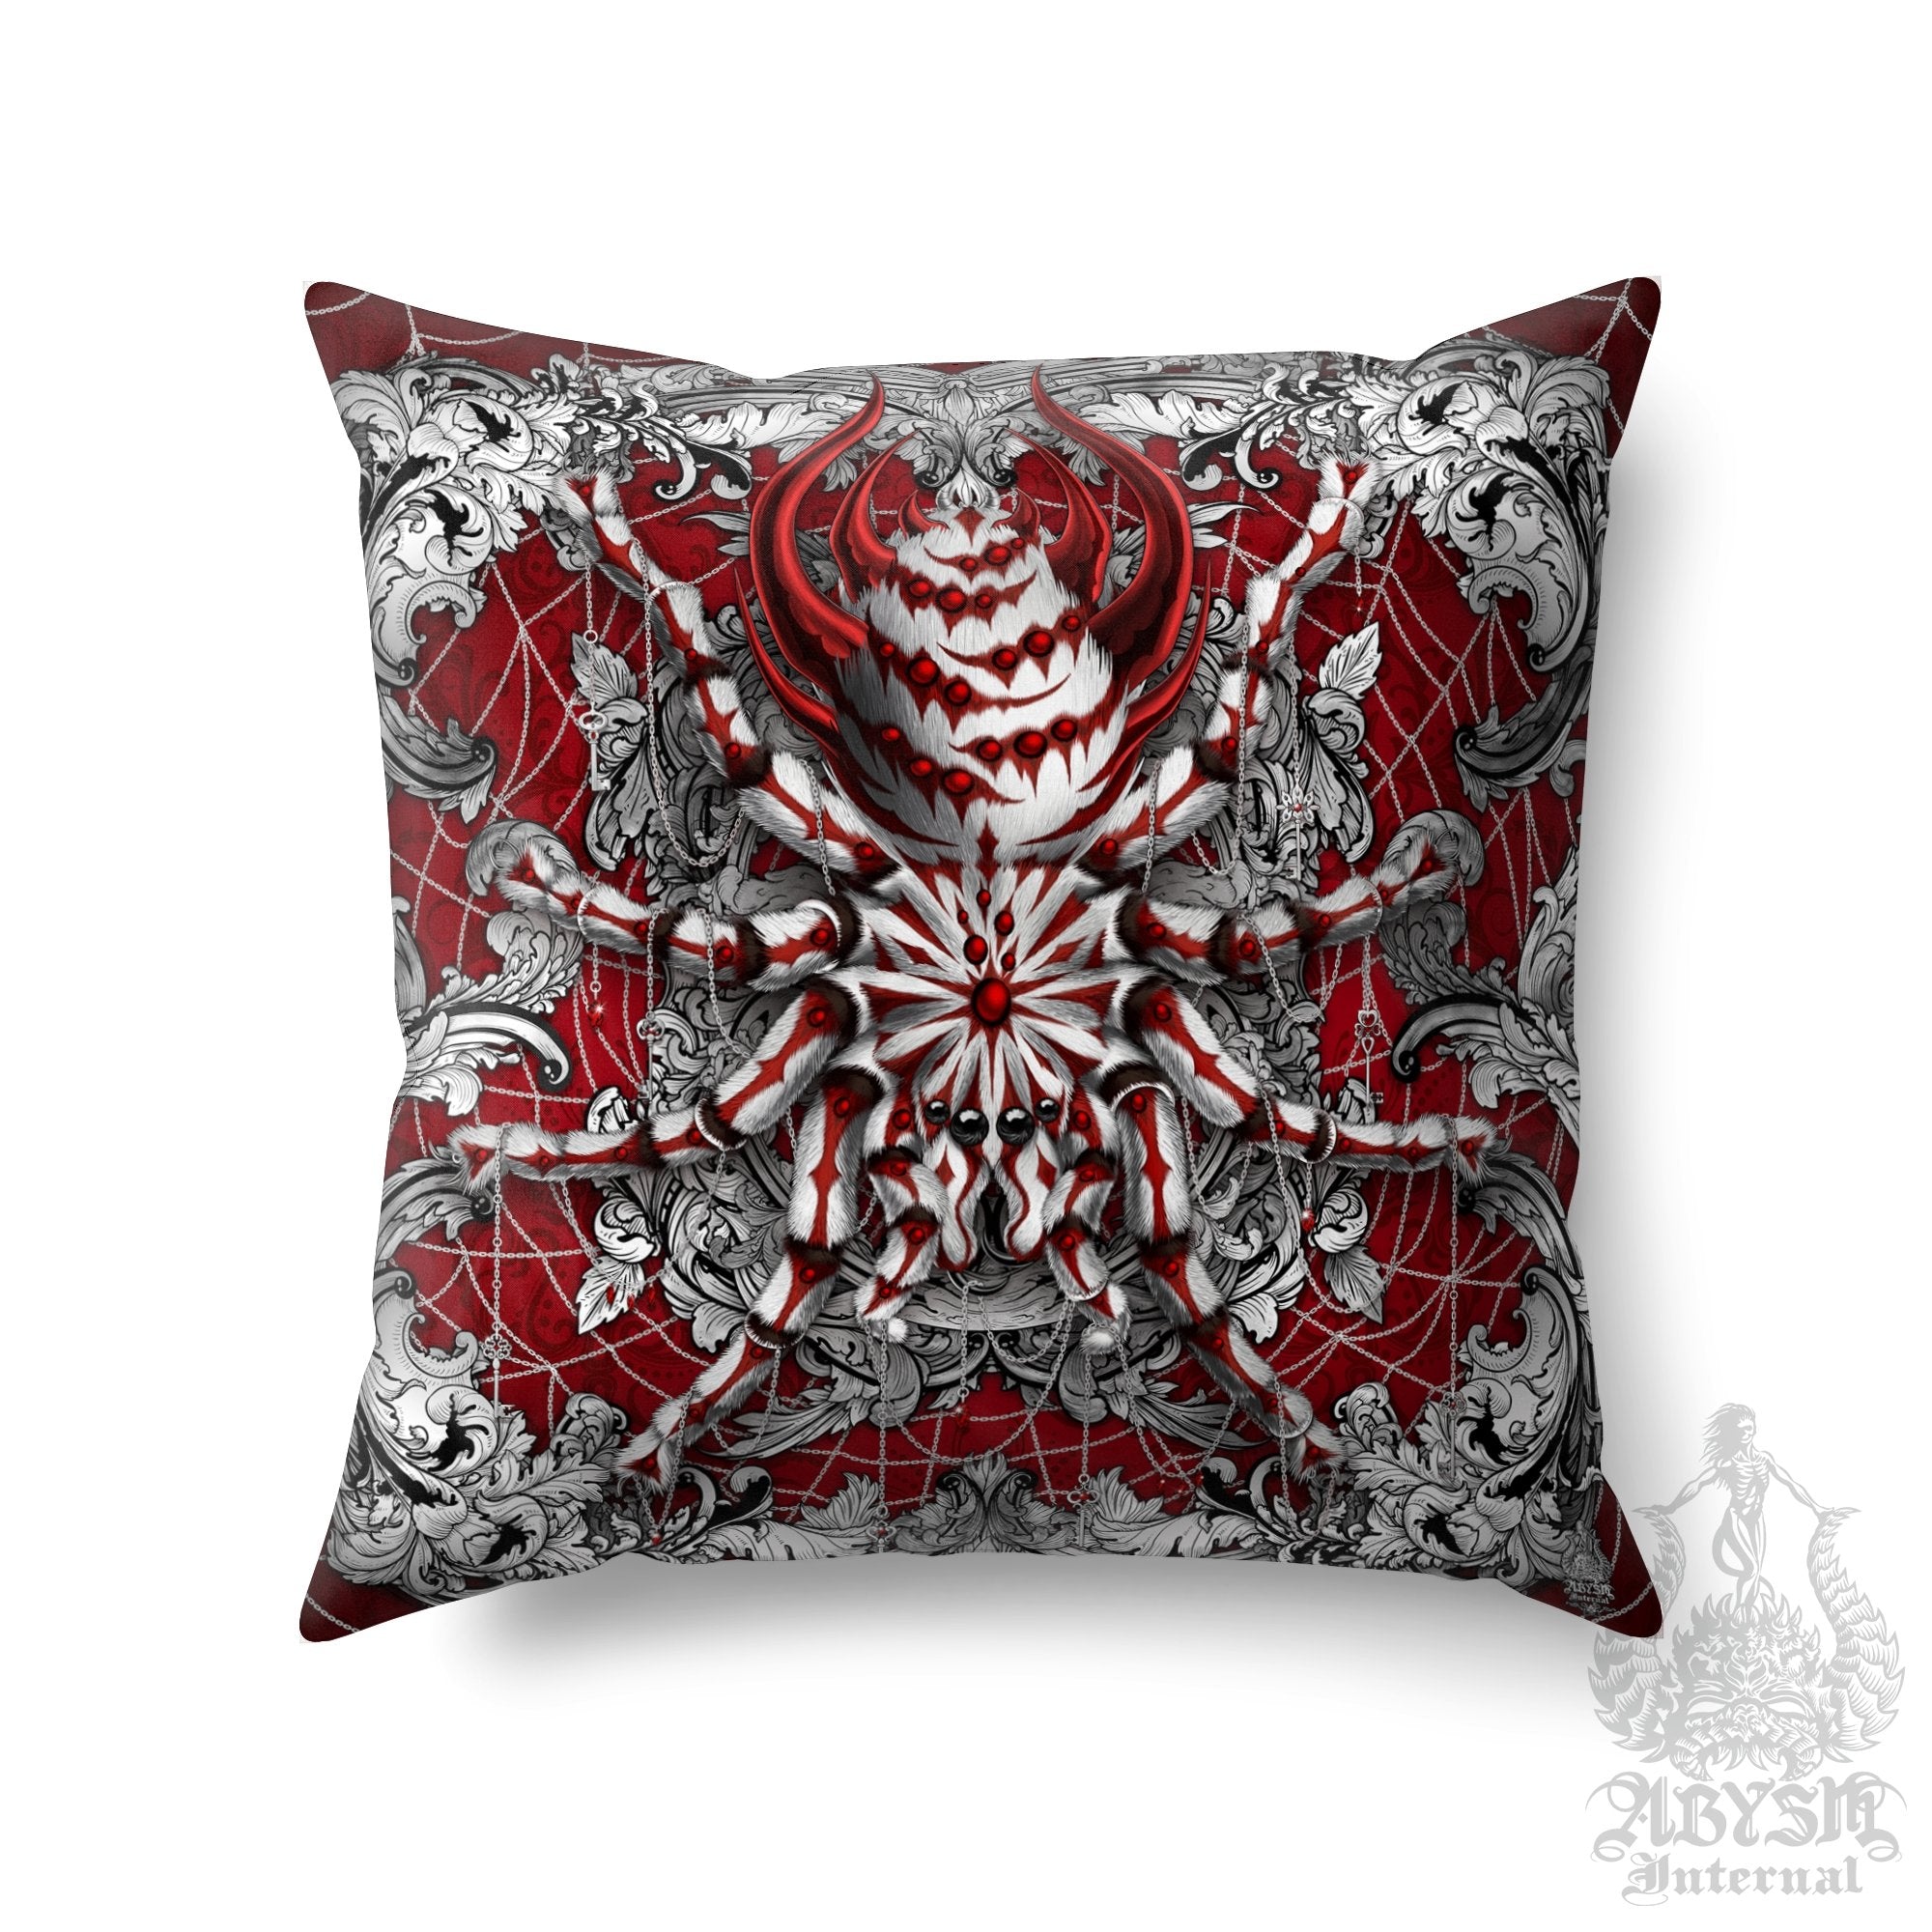 Spider Throw Pillow, Decorative Accent Cushion, Eclectic Room Decor, Alternative and Funky Home - Tarantula, Silver Red - Abysm Internal